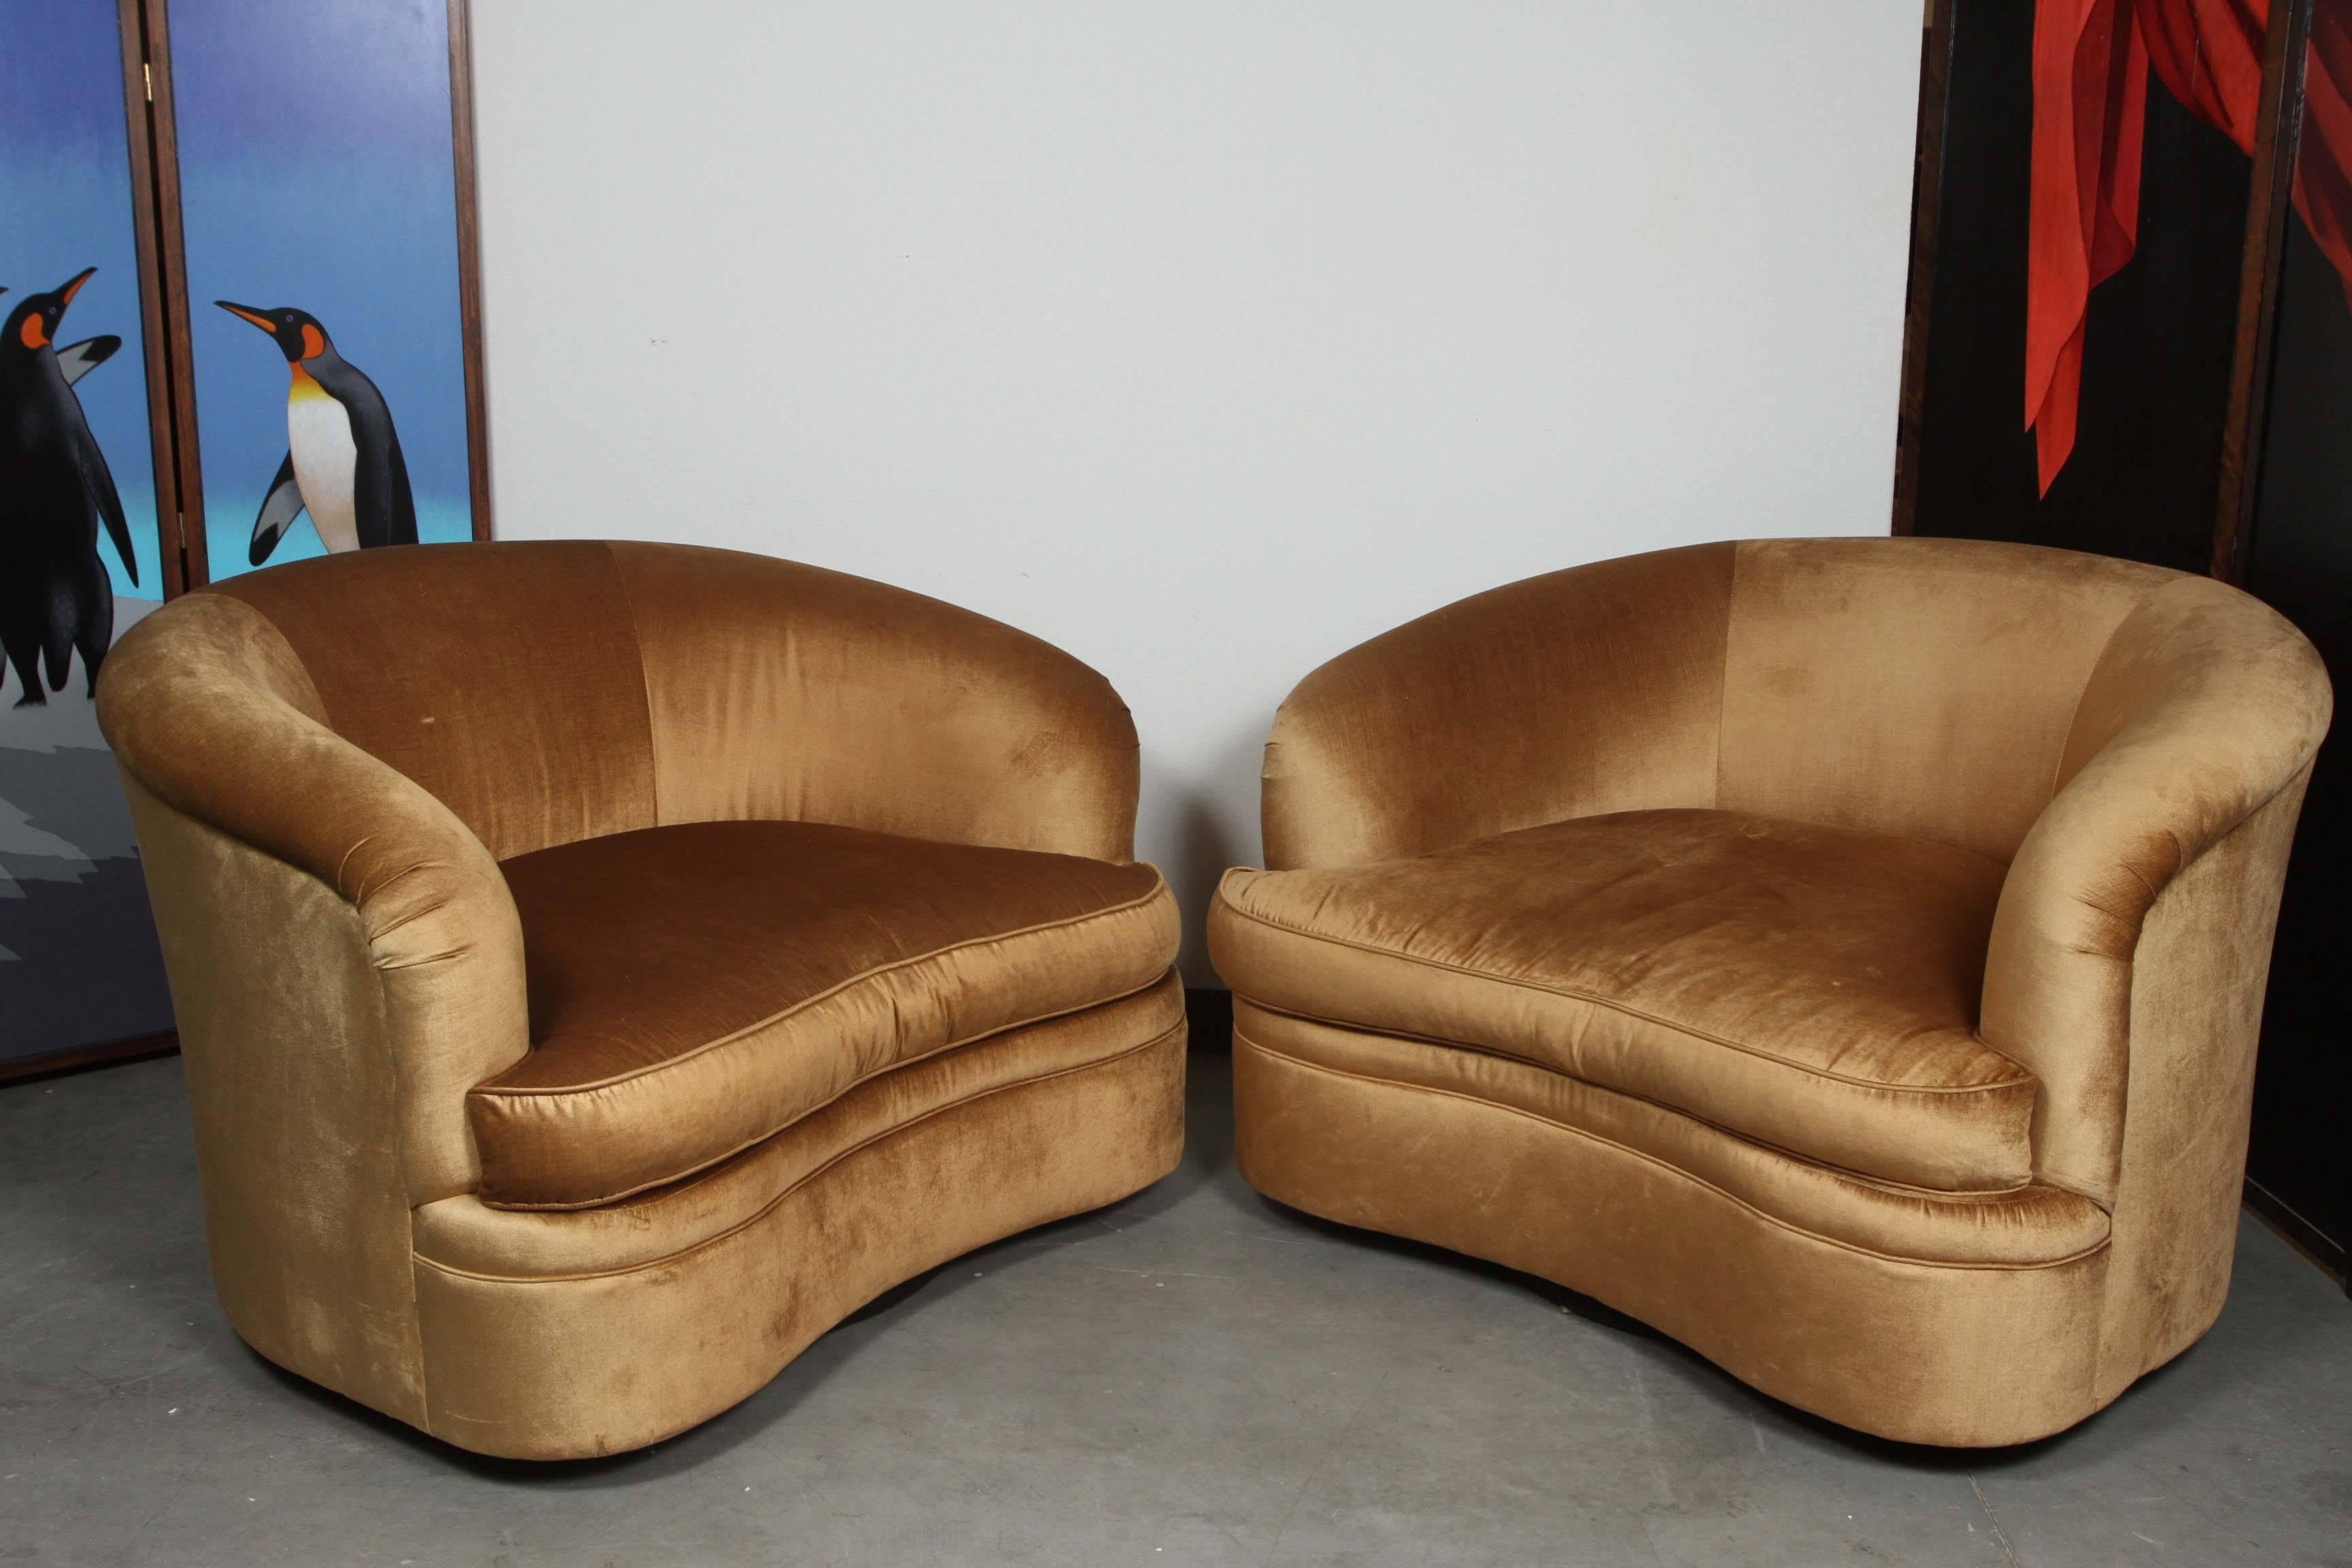 Pair of over scale club chairs by Century.
The chairs are upholstered in a gold velvet with copper overtones.
The matching ottoman is available as part of the set or may be purchased separately.

The price listed is just for the chairs.

